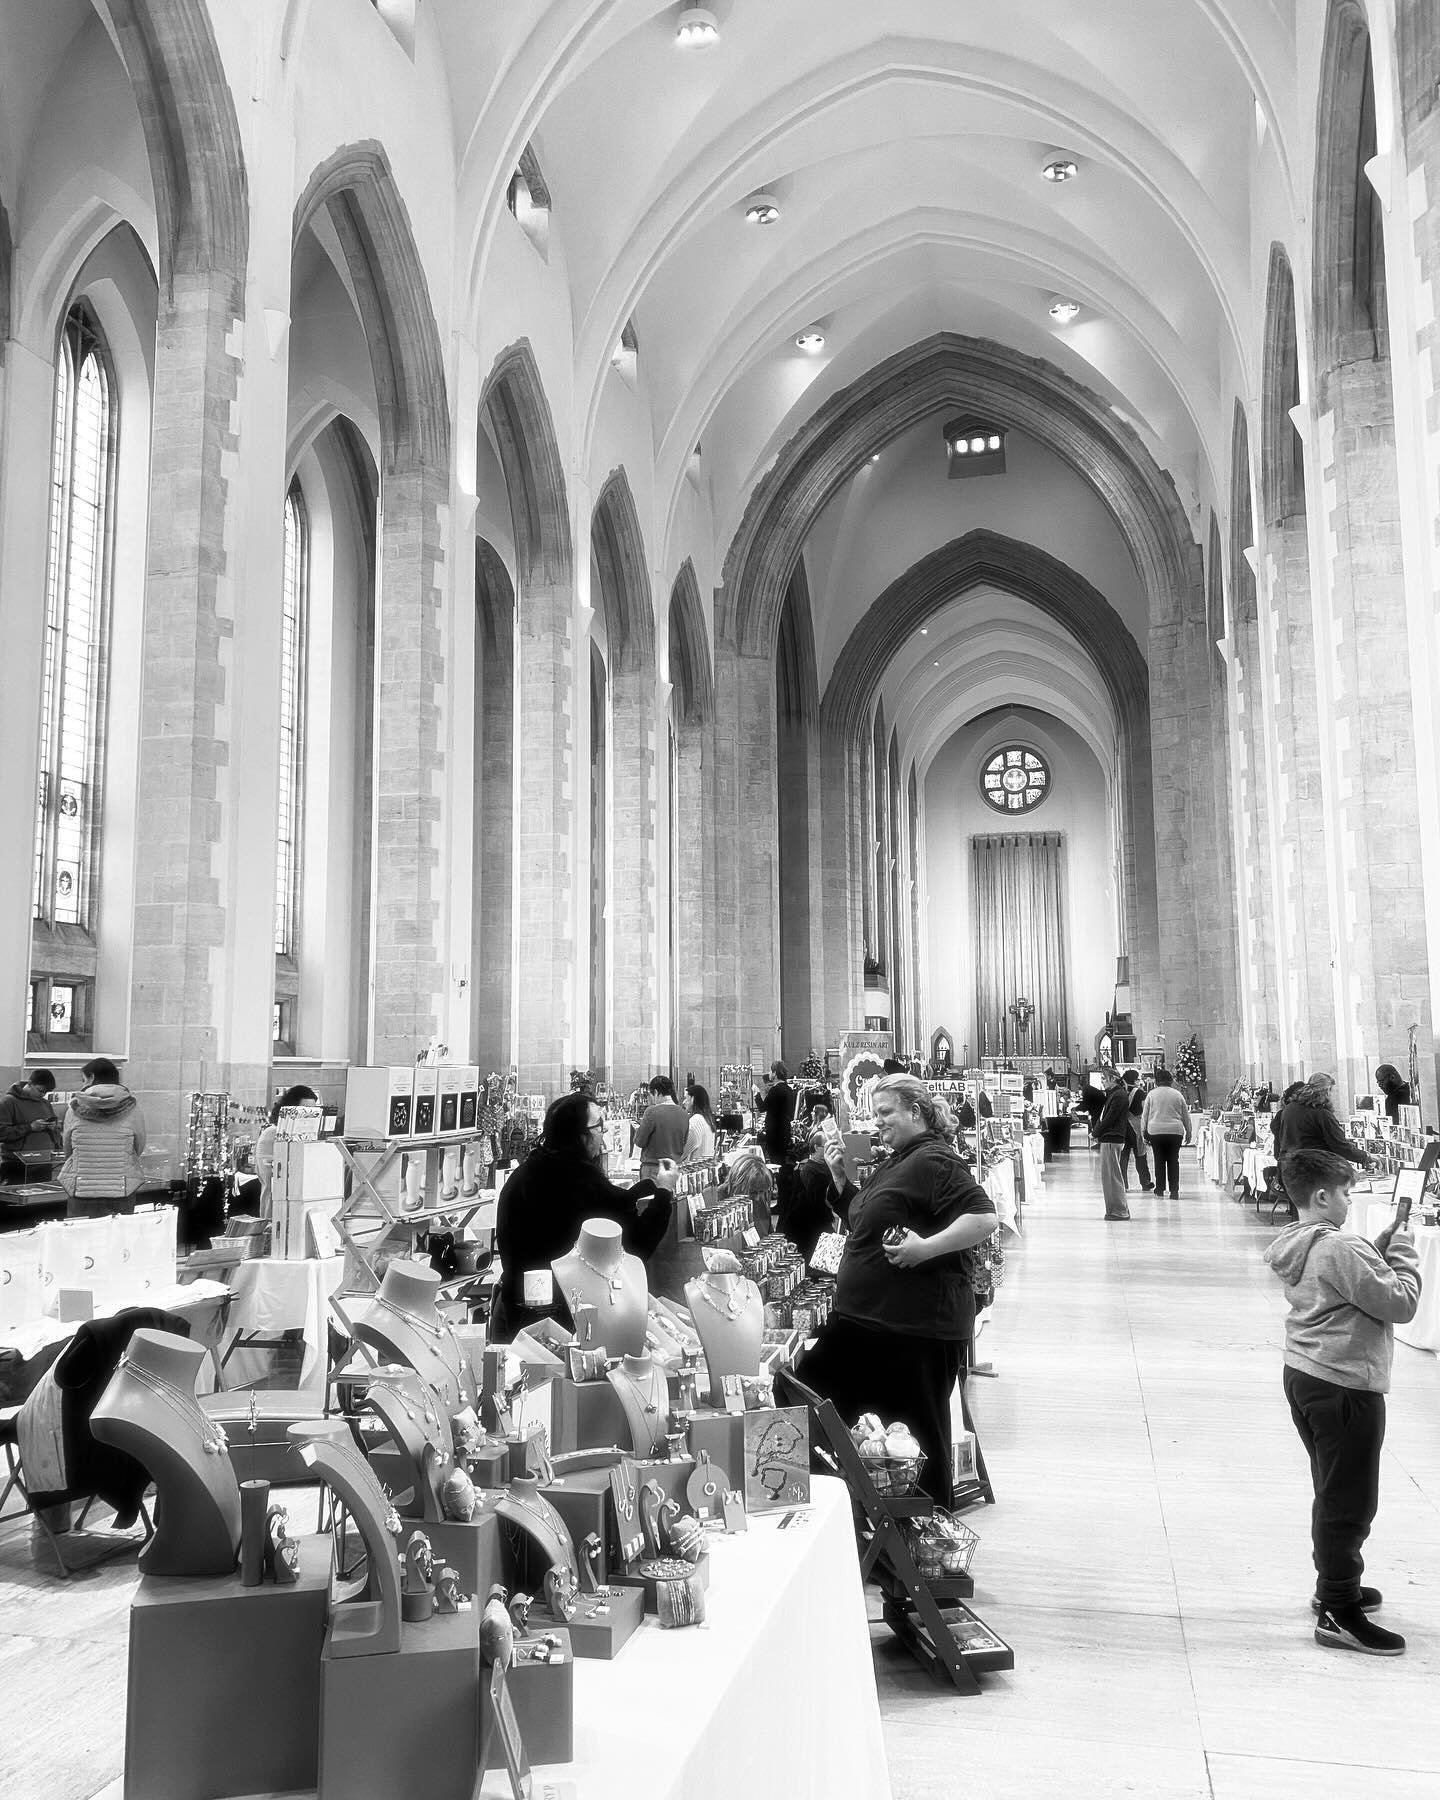 Spent a spectacular day at the @thecraftandflea market in one of the most incredible venues, Guildford Cathedral. Thank you to everyone who visited Mary P Jewellery on Saturday. Met some lovely people and had a gorgeous surprise visit from an old fri